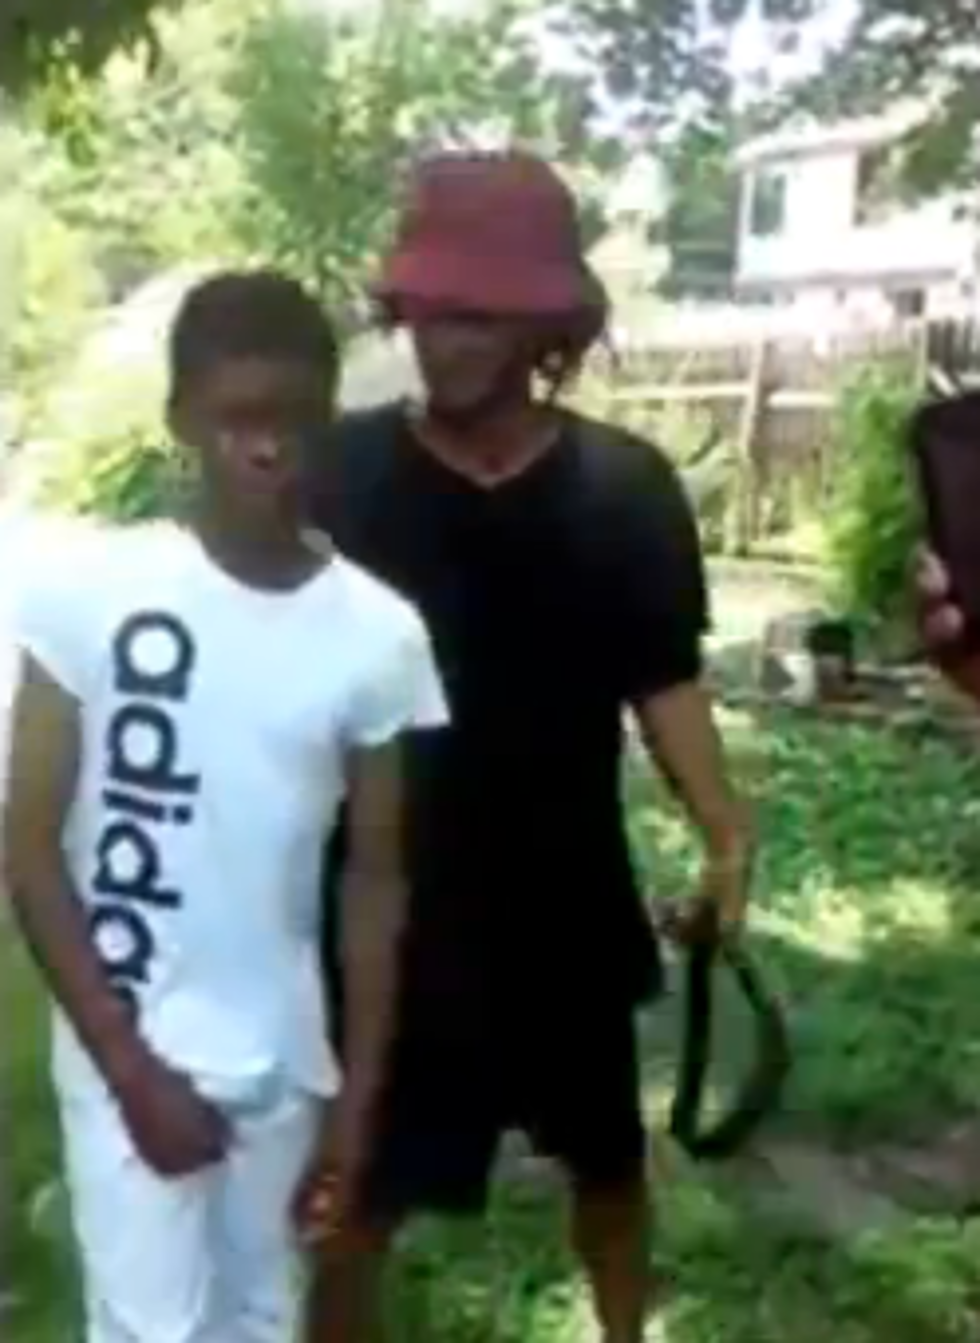 Man Catches Boy Stealing And Whips Him With A Belt Instead Of Calling The Police [VIDEO]